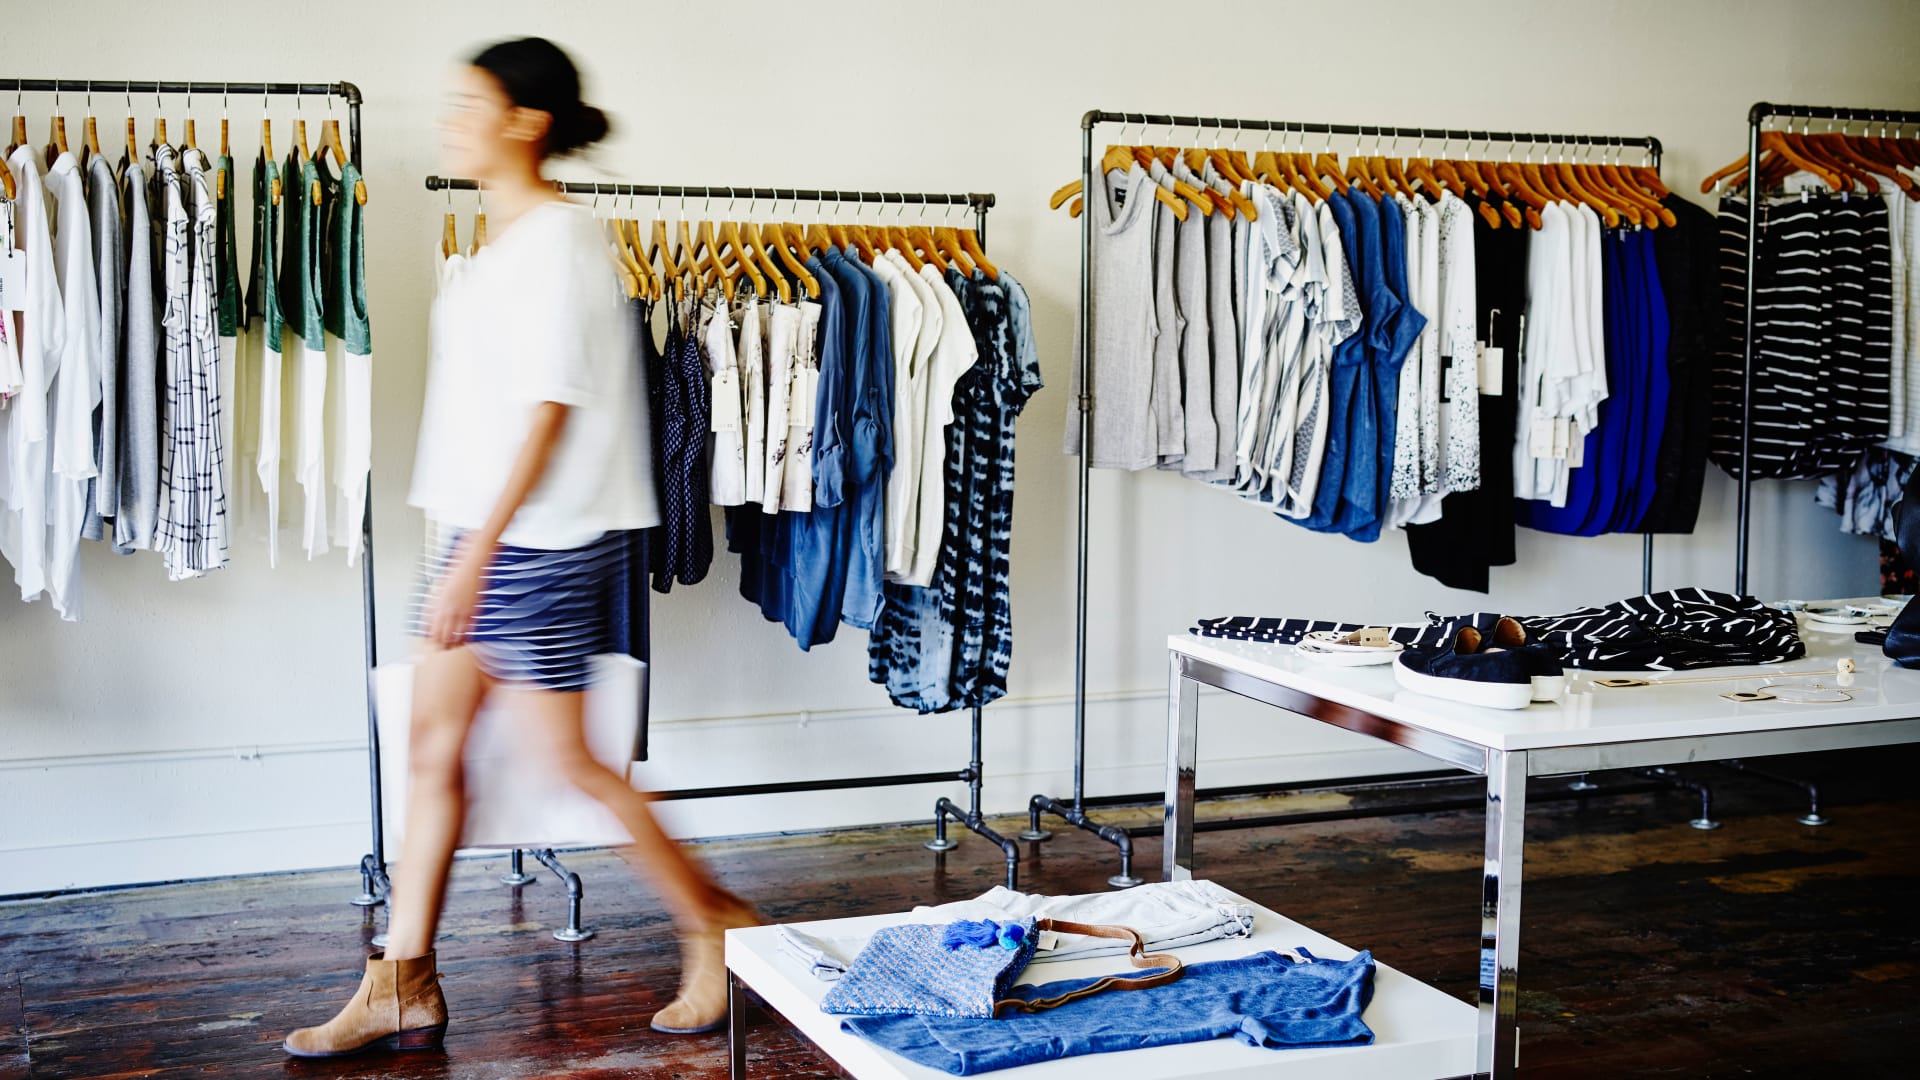 These Retailers Don't Wait, They Innovate